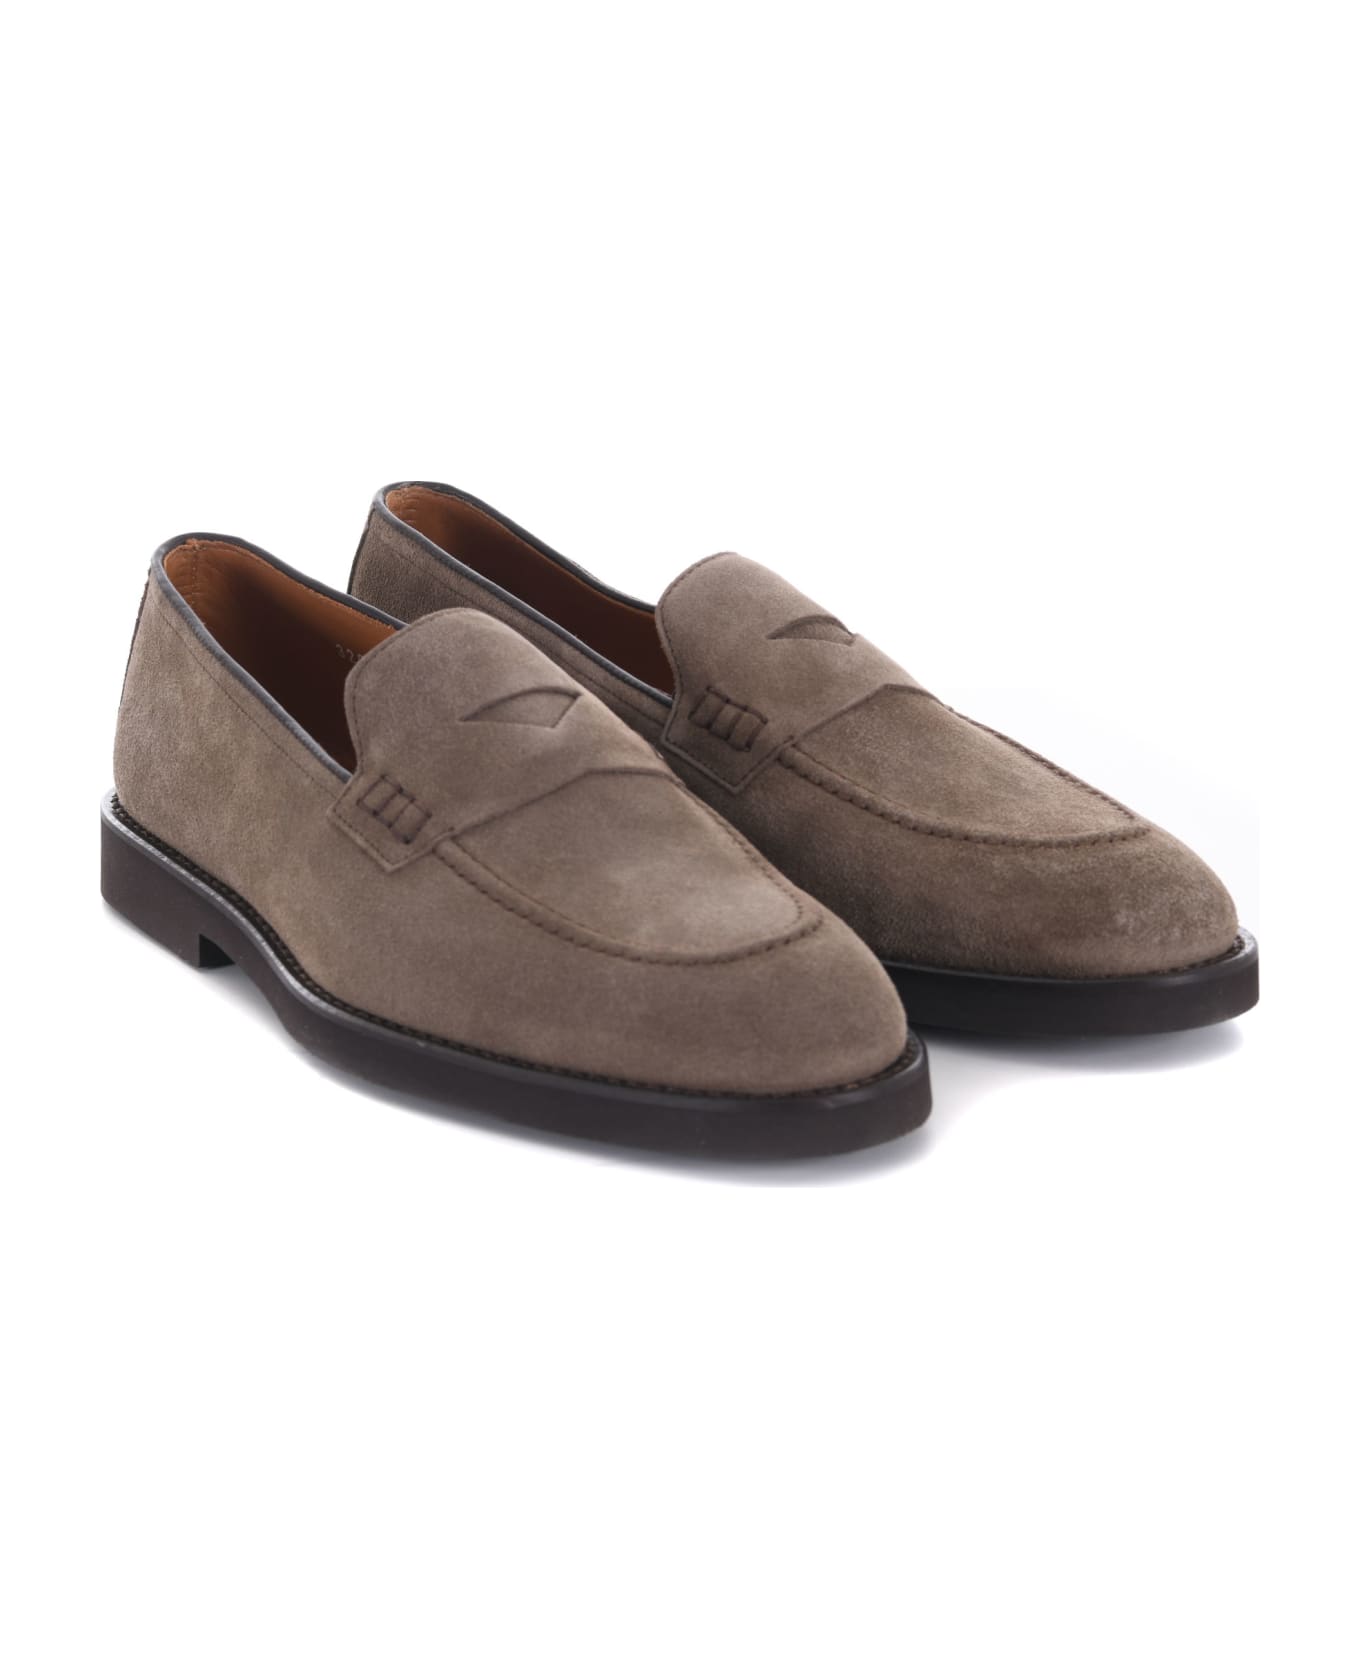 Doucal's Loafers - Tortora scuro